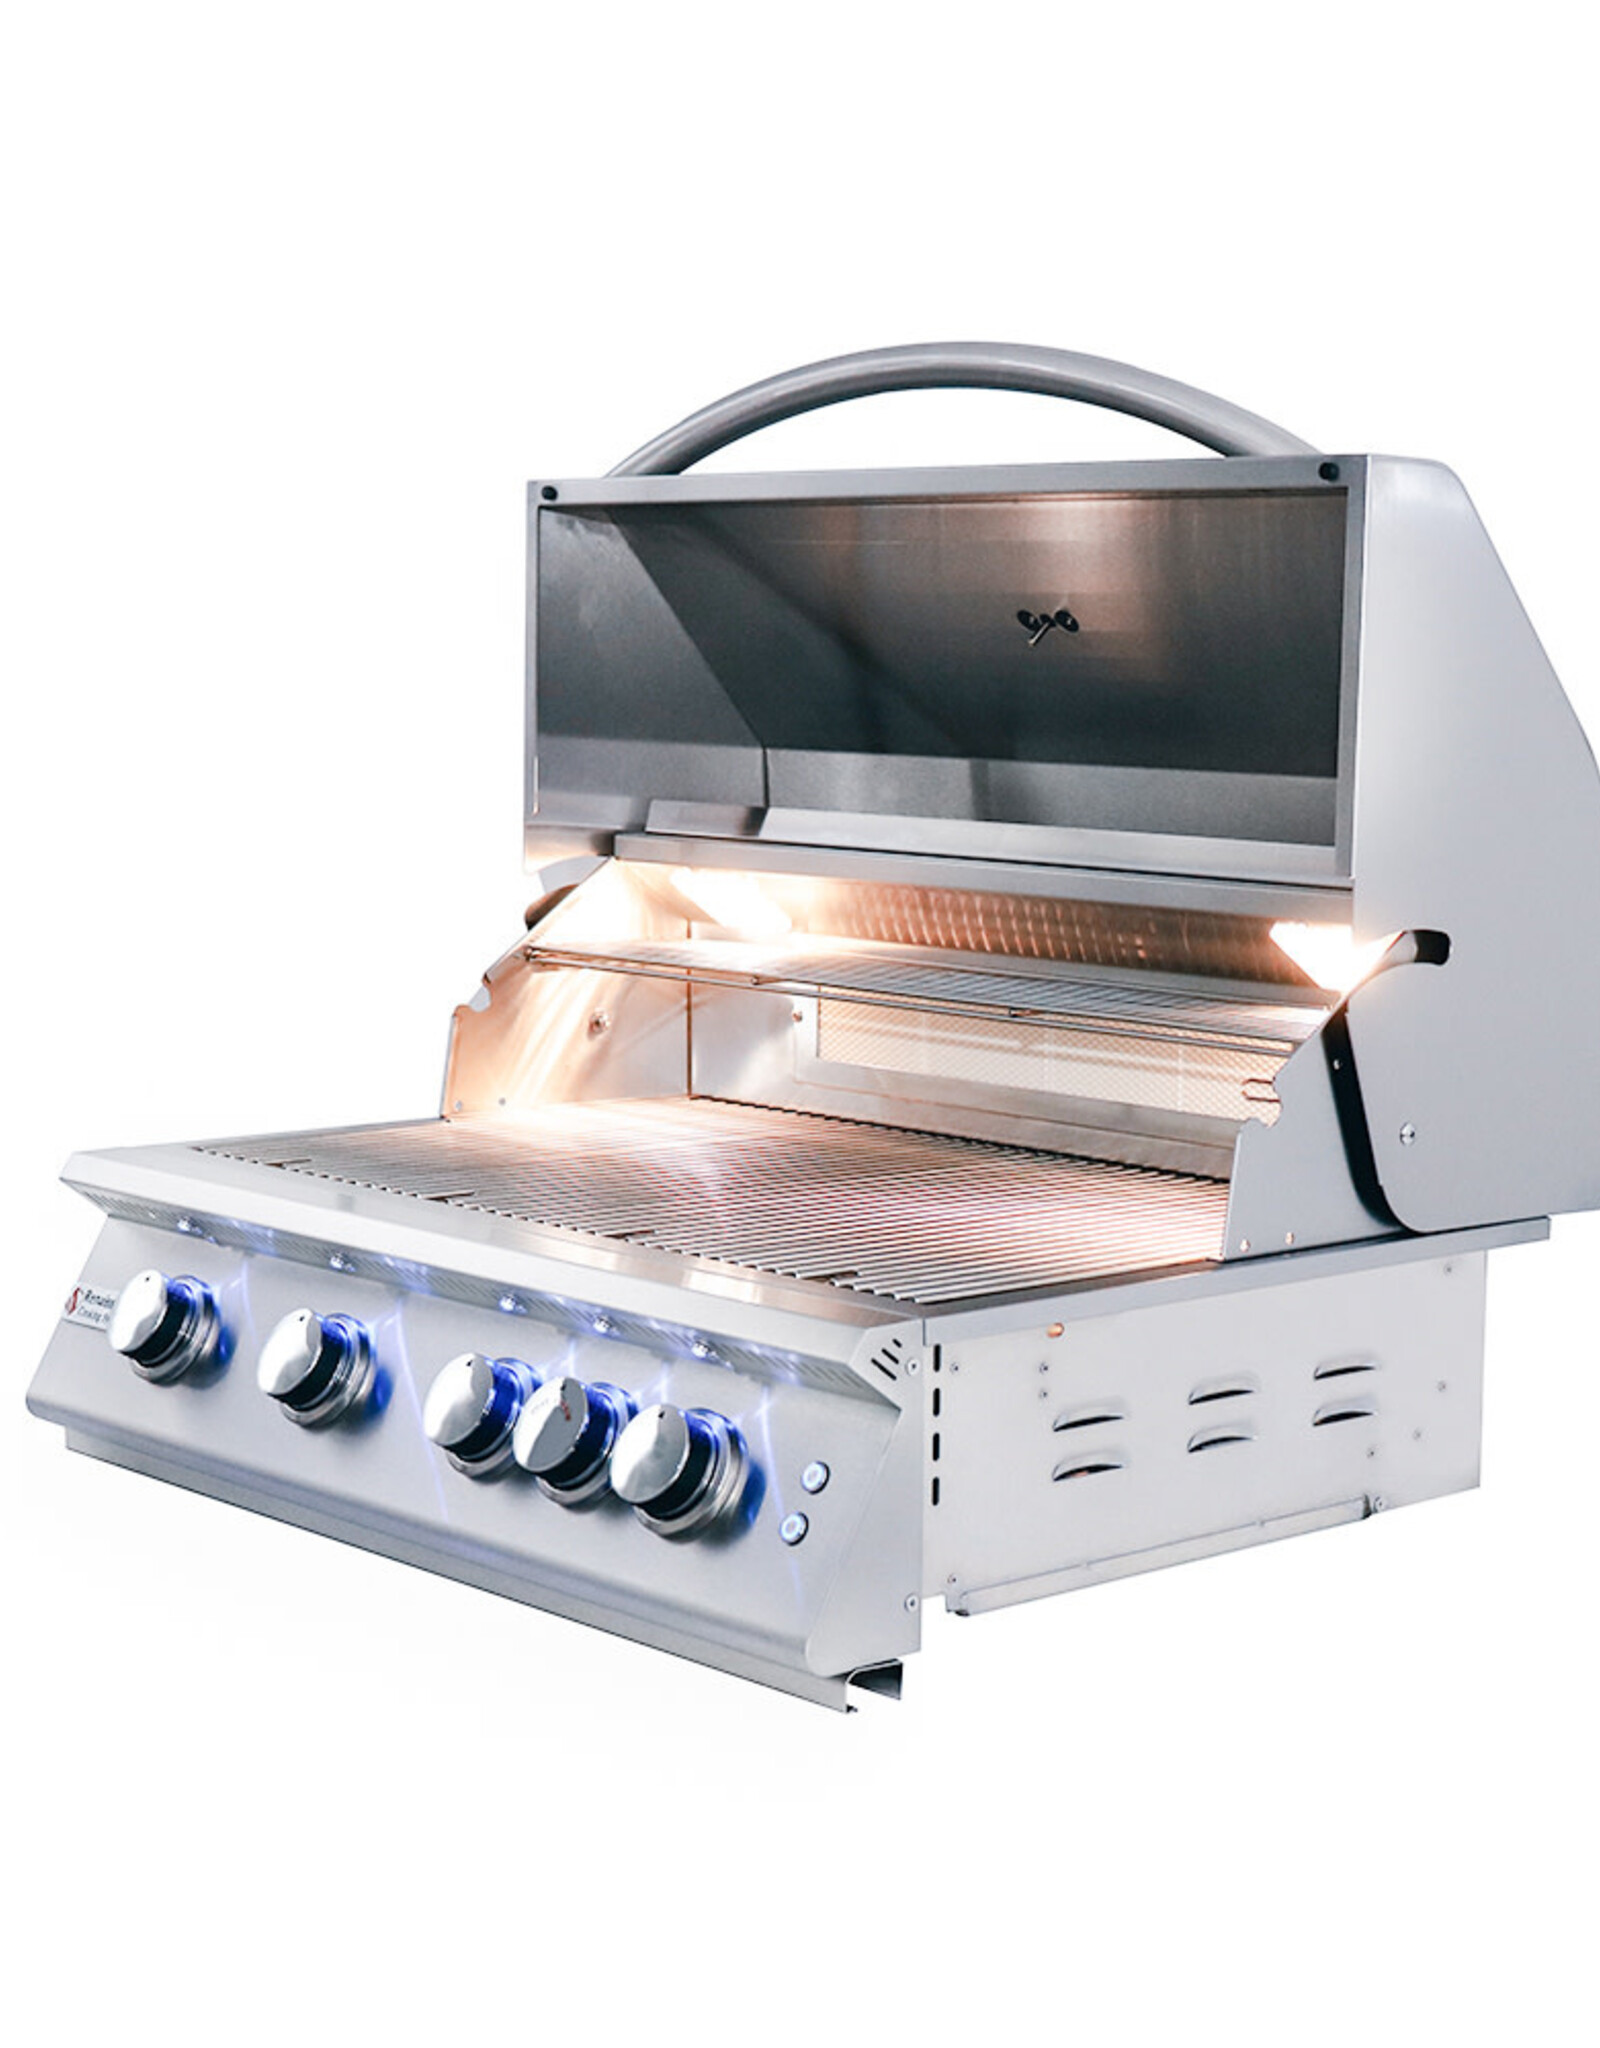 Renaissance Cooking Systems Renaissance Cooking Systems 32" Premier Drop-In Grill W / Rear Burner & LED Lights - Natural Gas - RJC32AL